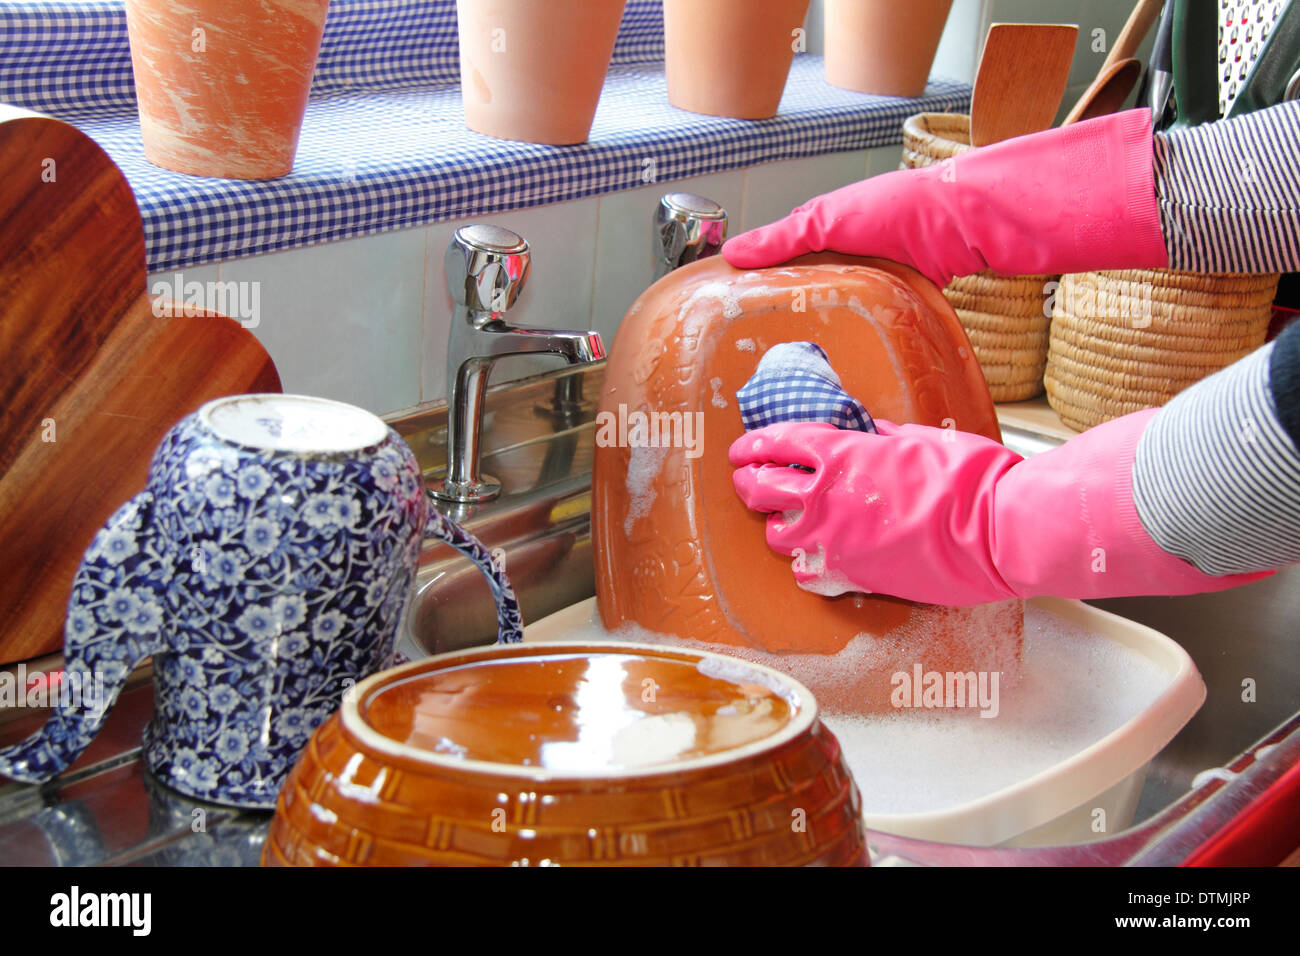 Woman wearing rubber gloves washing up the pots at the kitchen sink at home Stock Photo